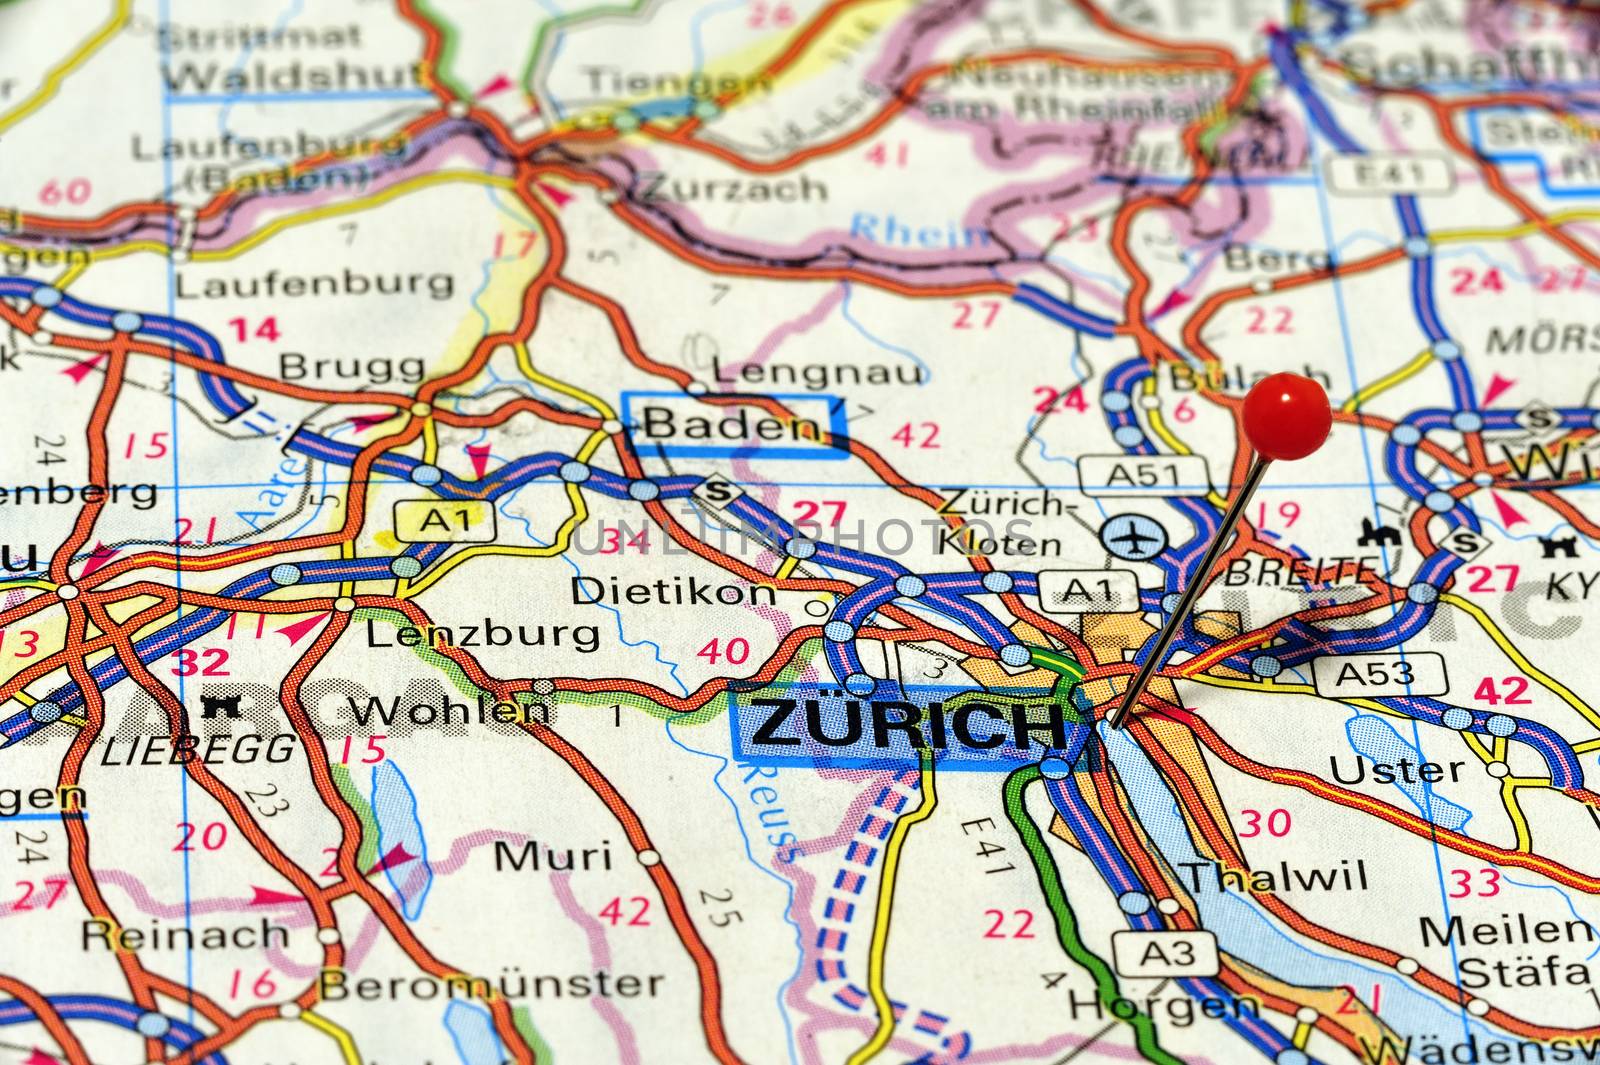 A red pushpin on a map pointing to Zurich, Switzerland.